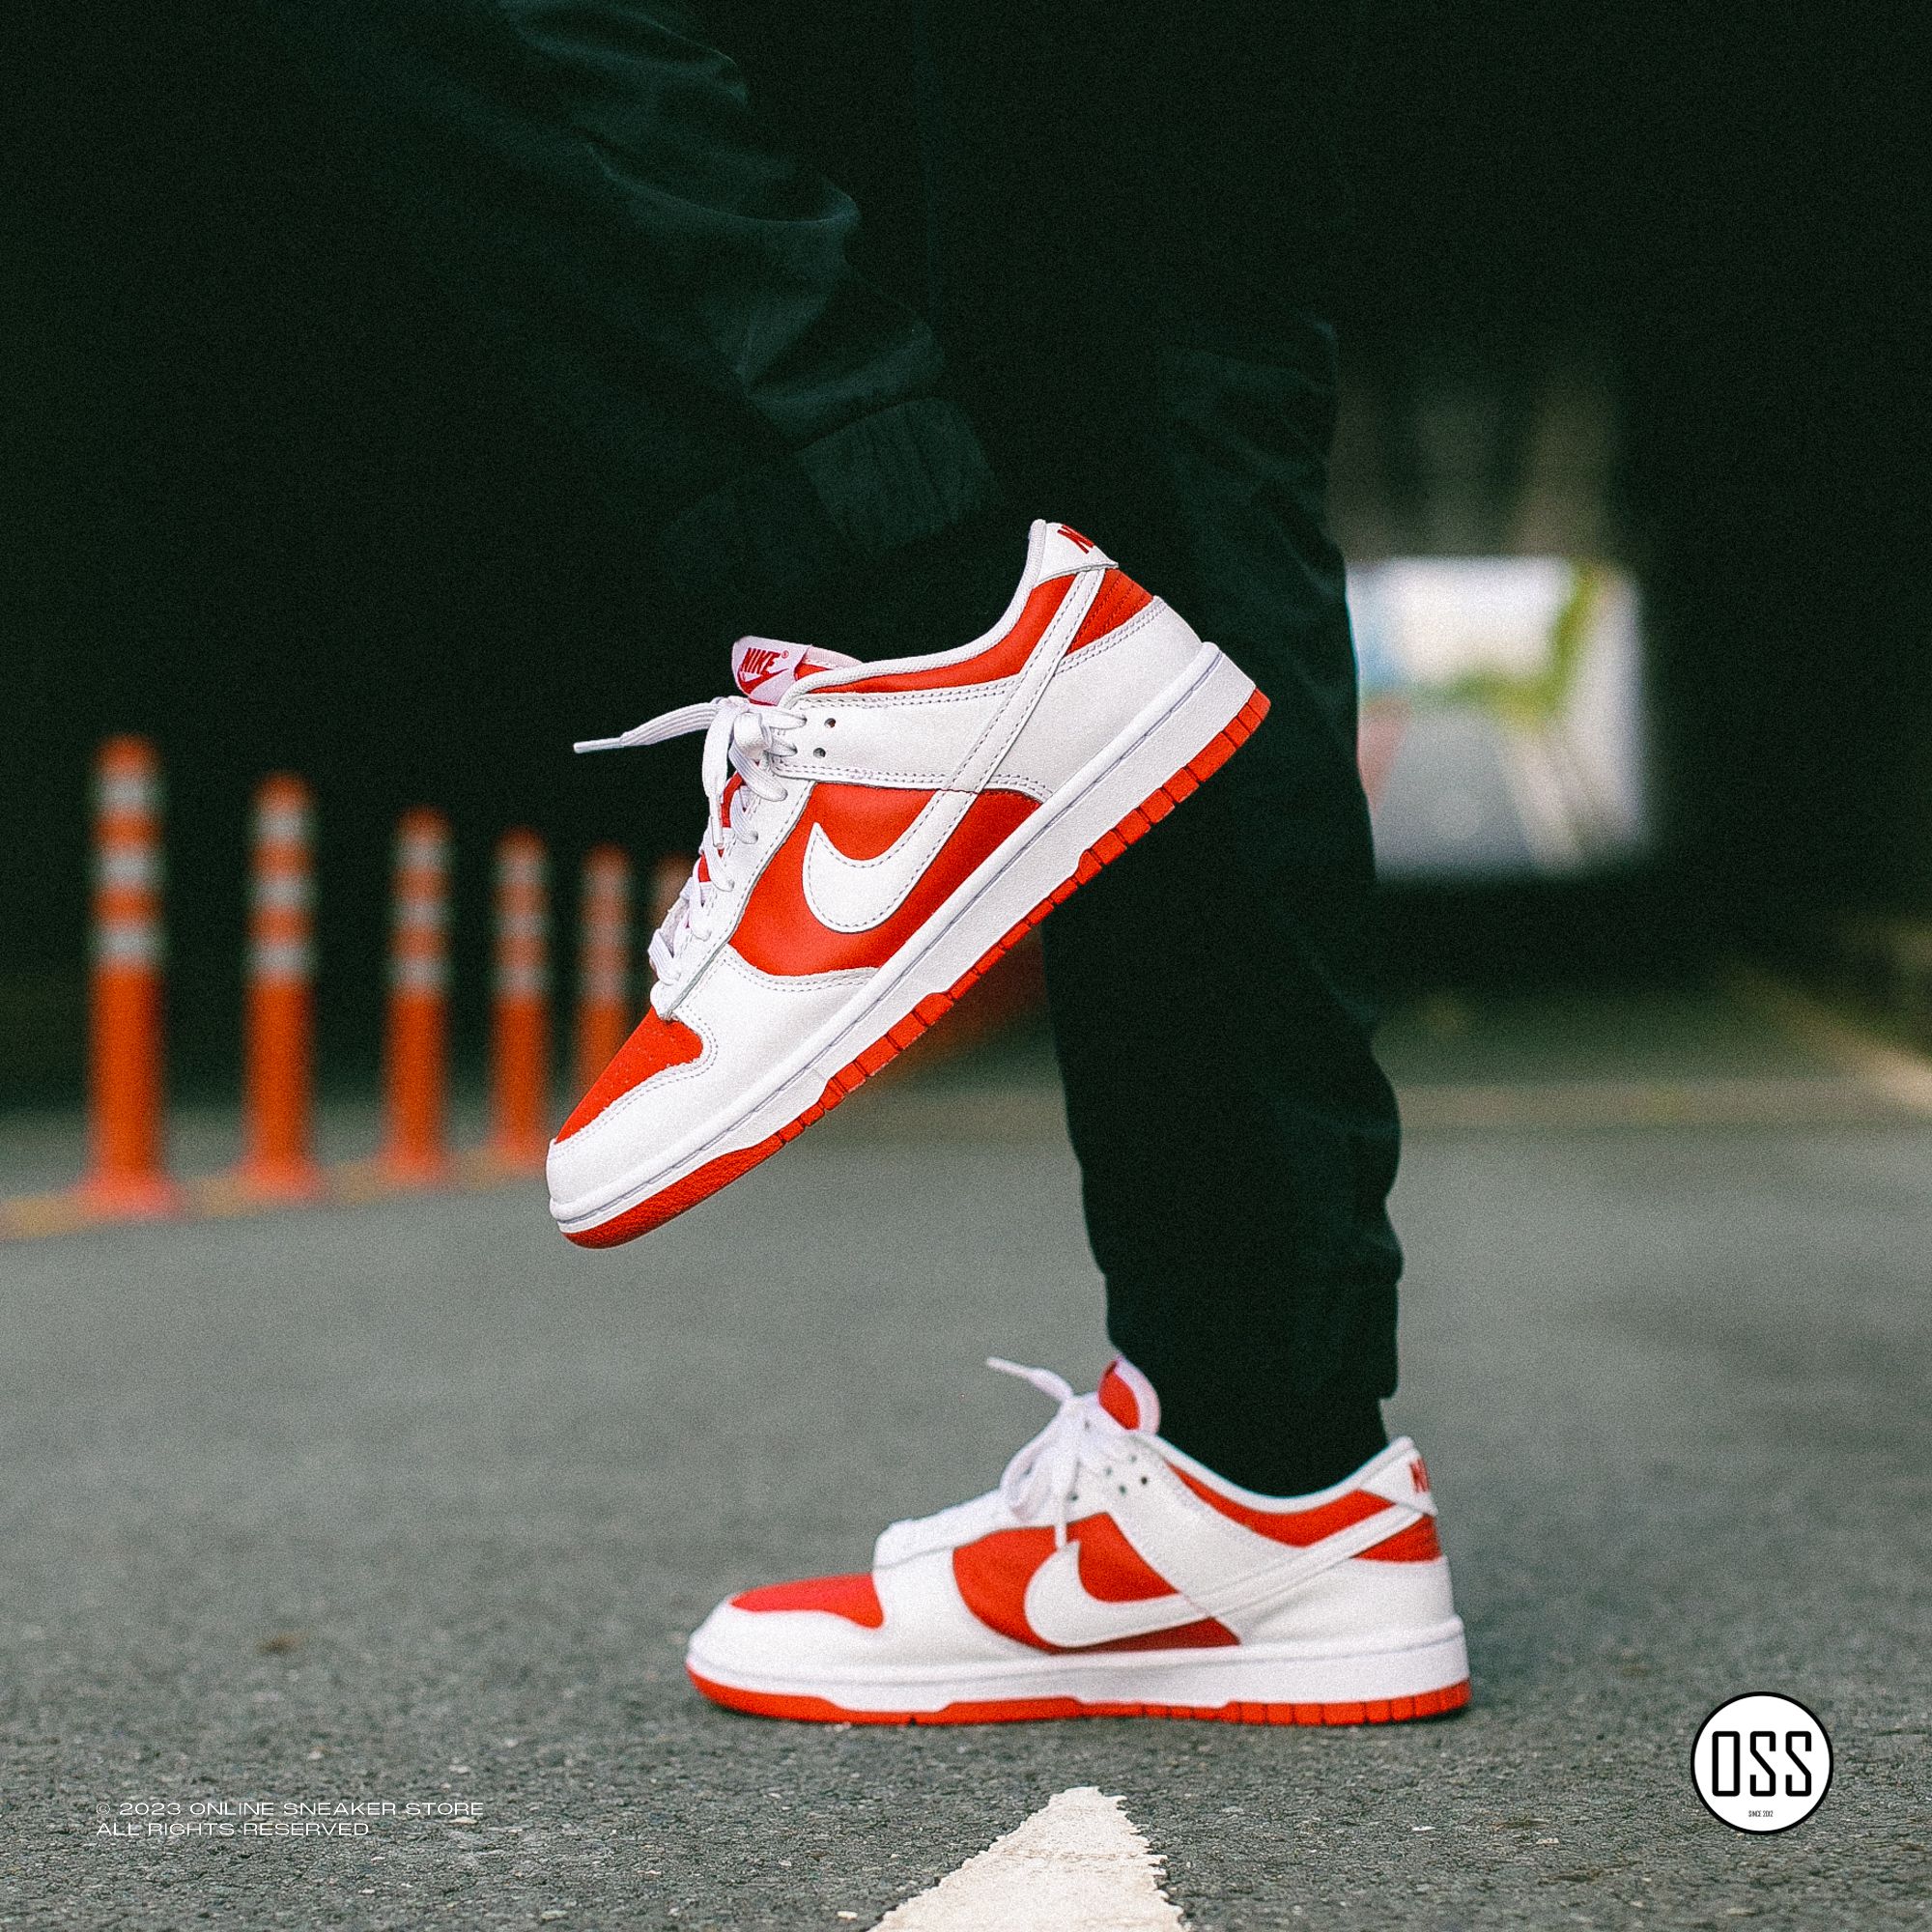  Nike Dunk Low - Championship Red 